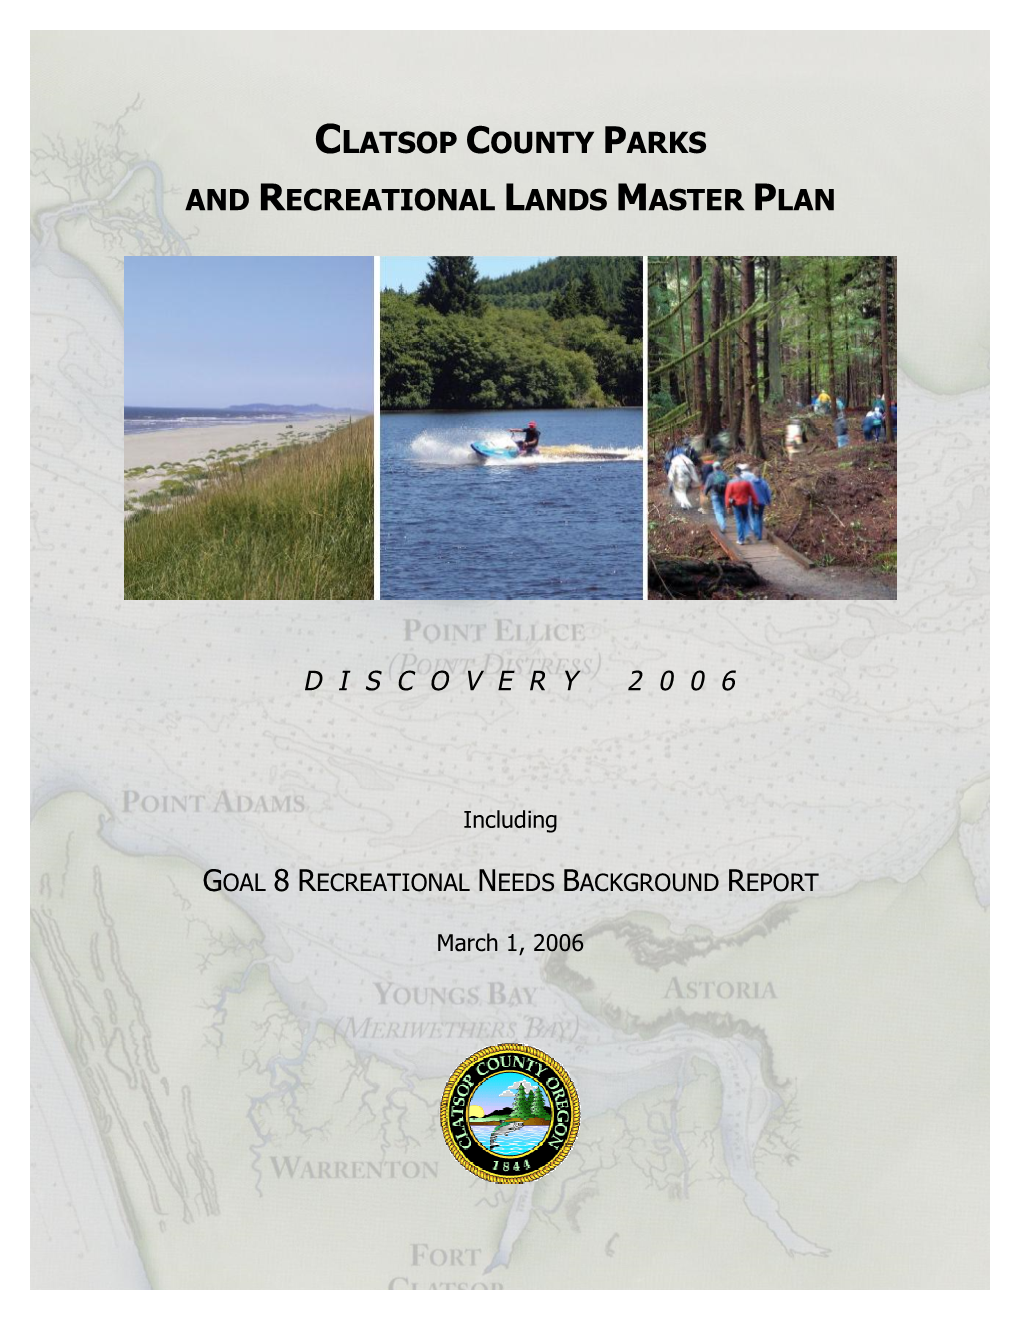 Clatsop County Parks and Recreational Lands Master Plan Builds on Oregon’S Long History of Land-Use Planning and Policymaking at the State and Local Level